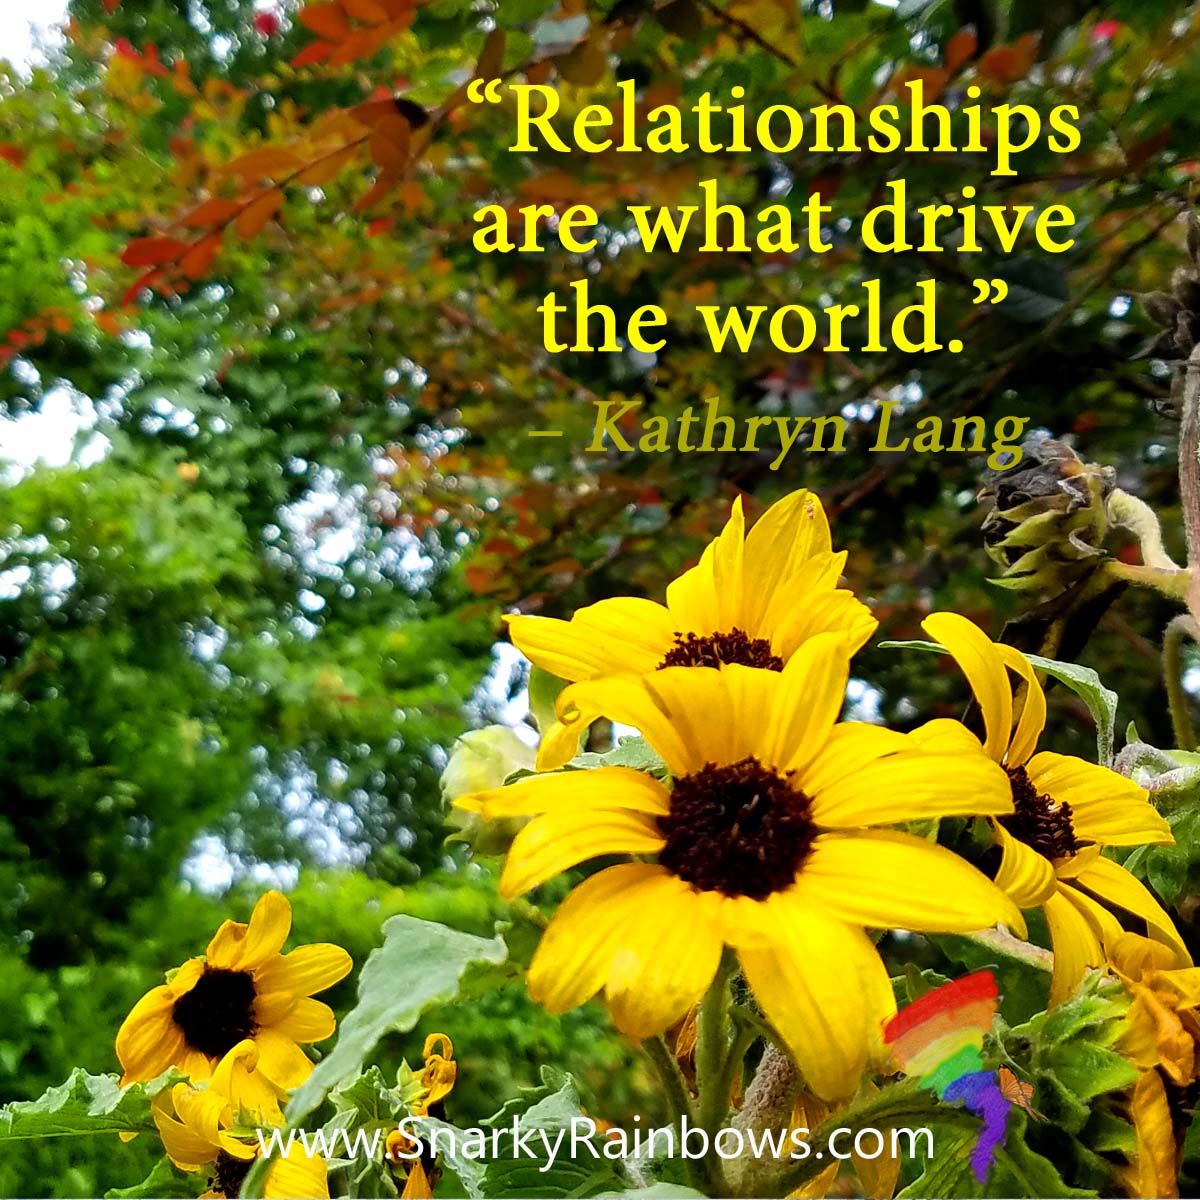 #QuoteoftheDay - relationships drive the world